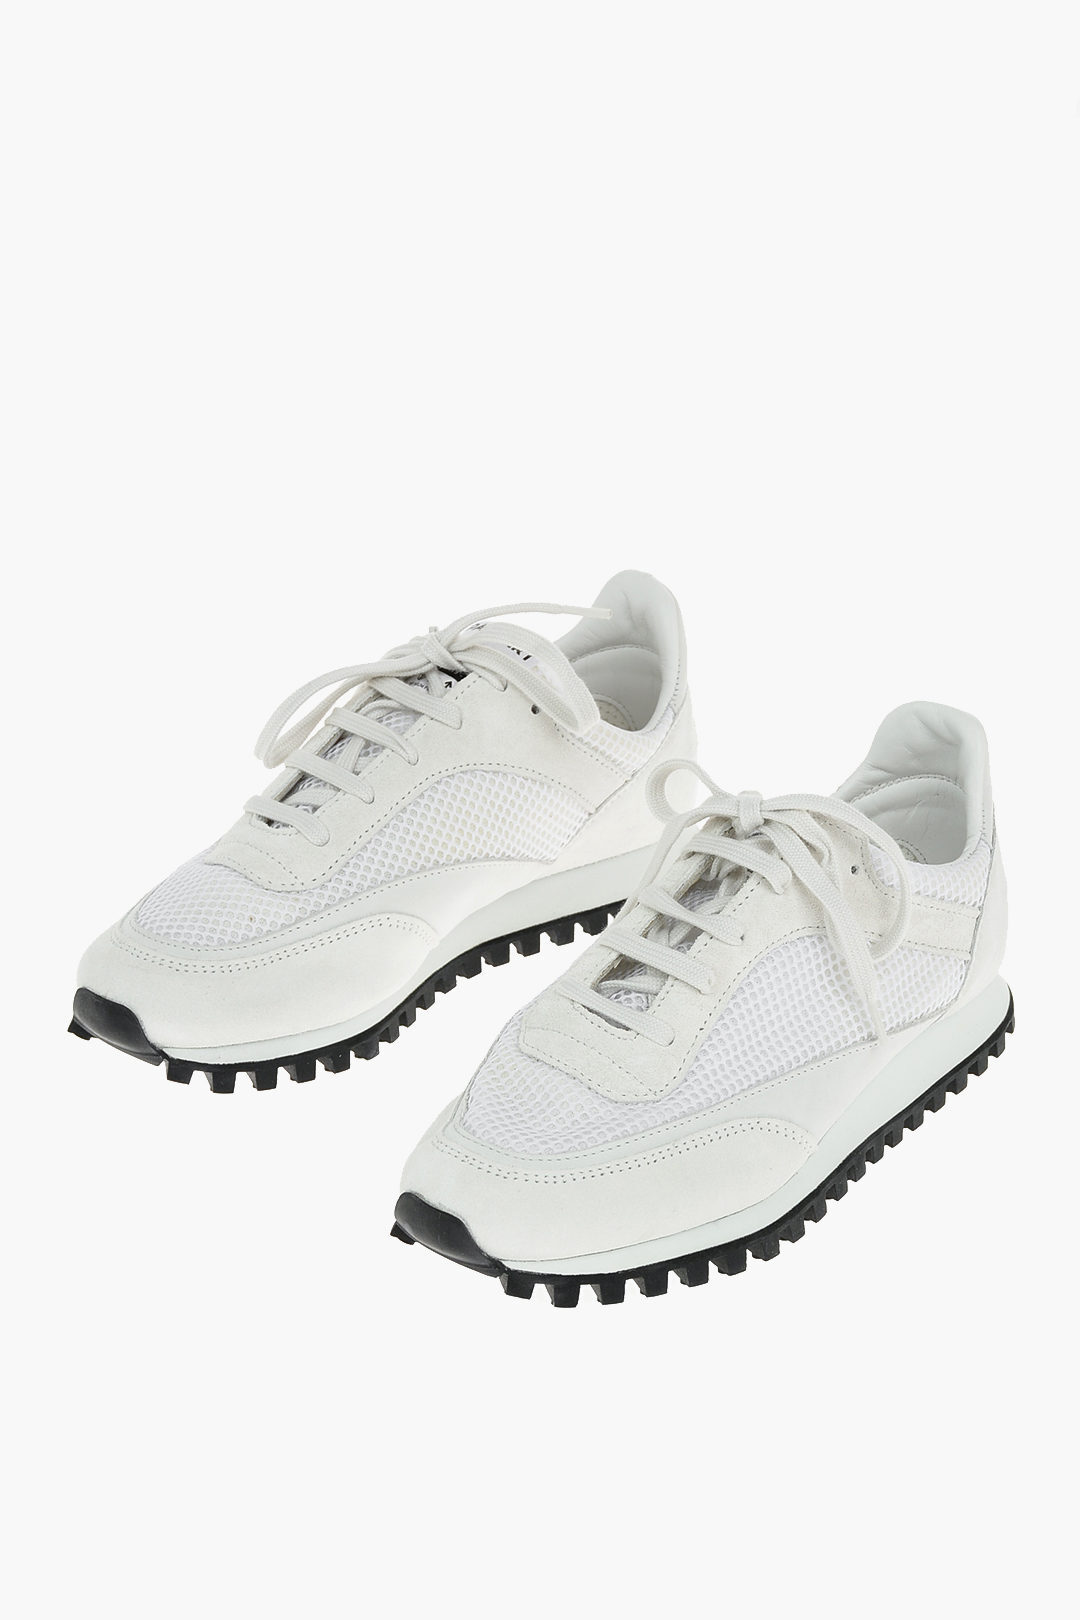 COMME DES GARCONS コム デ ギャルソン White スニーカー RHK102W21 WHITE レディース SPALWART LEATHER AND FABRIC SNEAKERS  dk